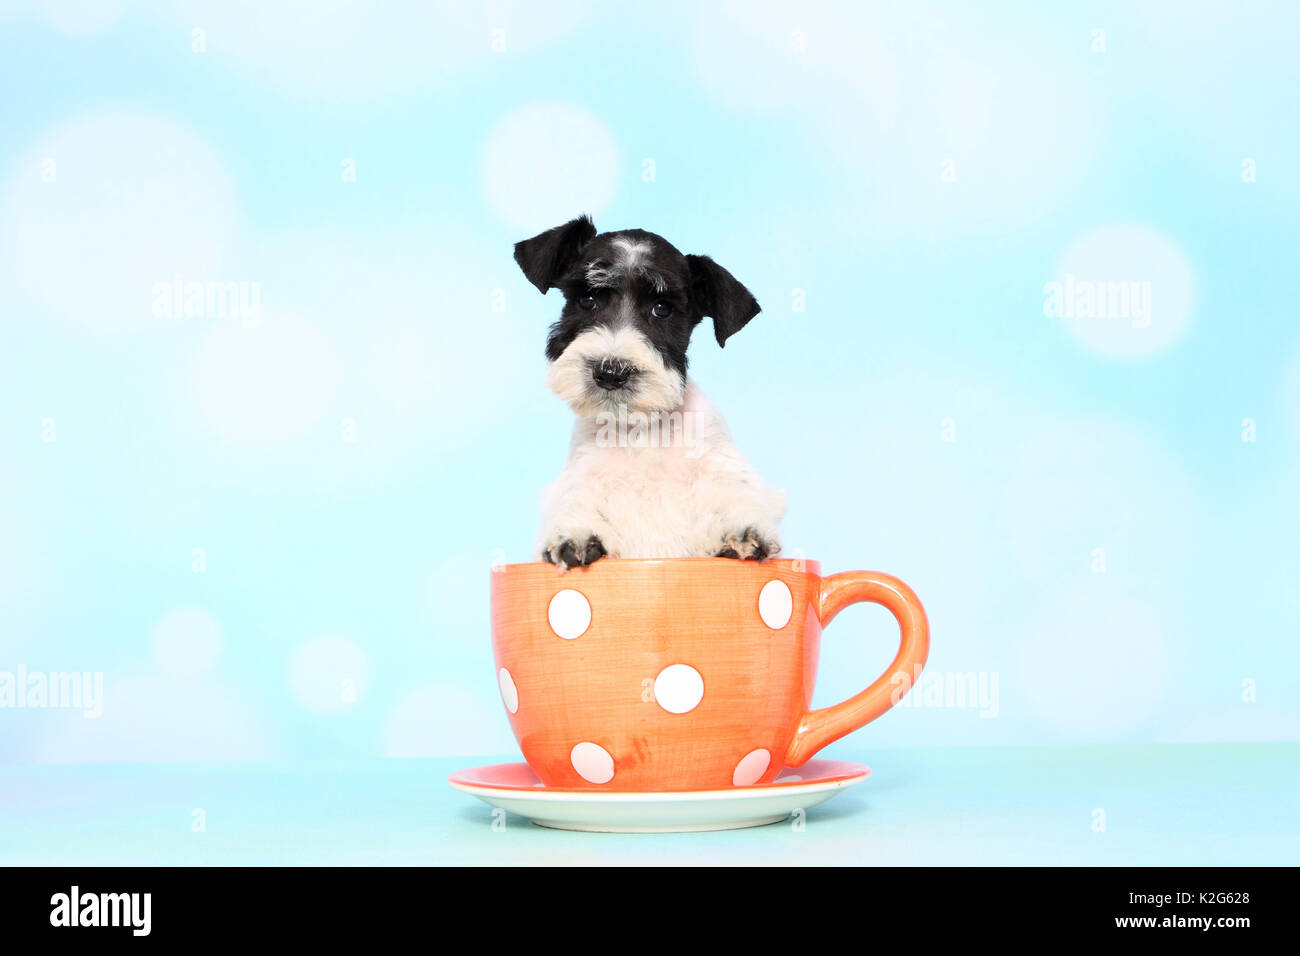 Parti-colored Miniature Schnauzer. Puppy in a big orange cup with white polka dots, seen against a light blue background. Germany Stock Photo